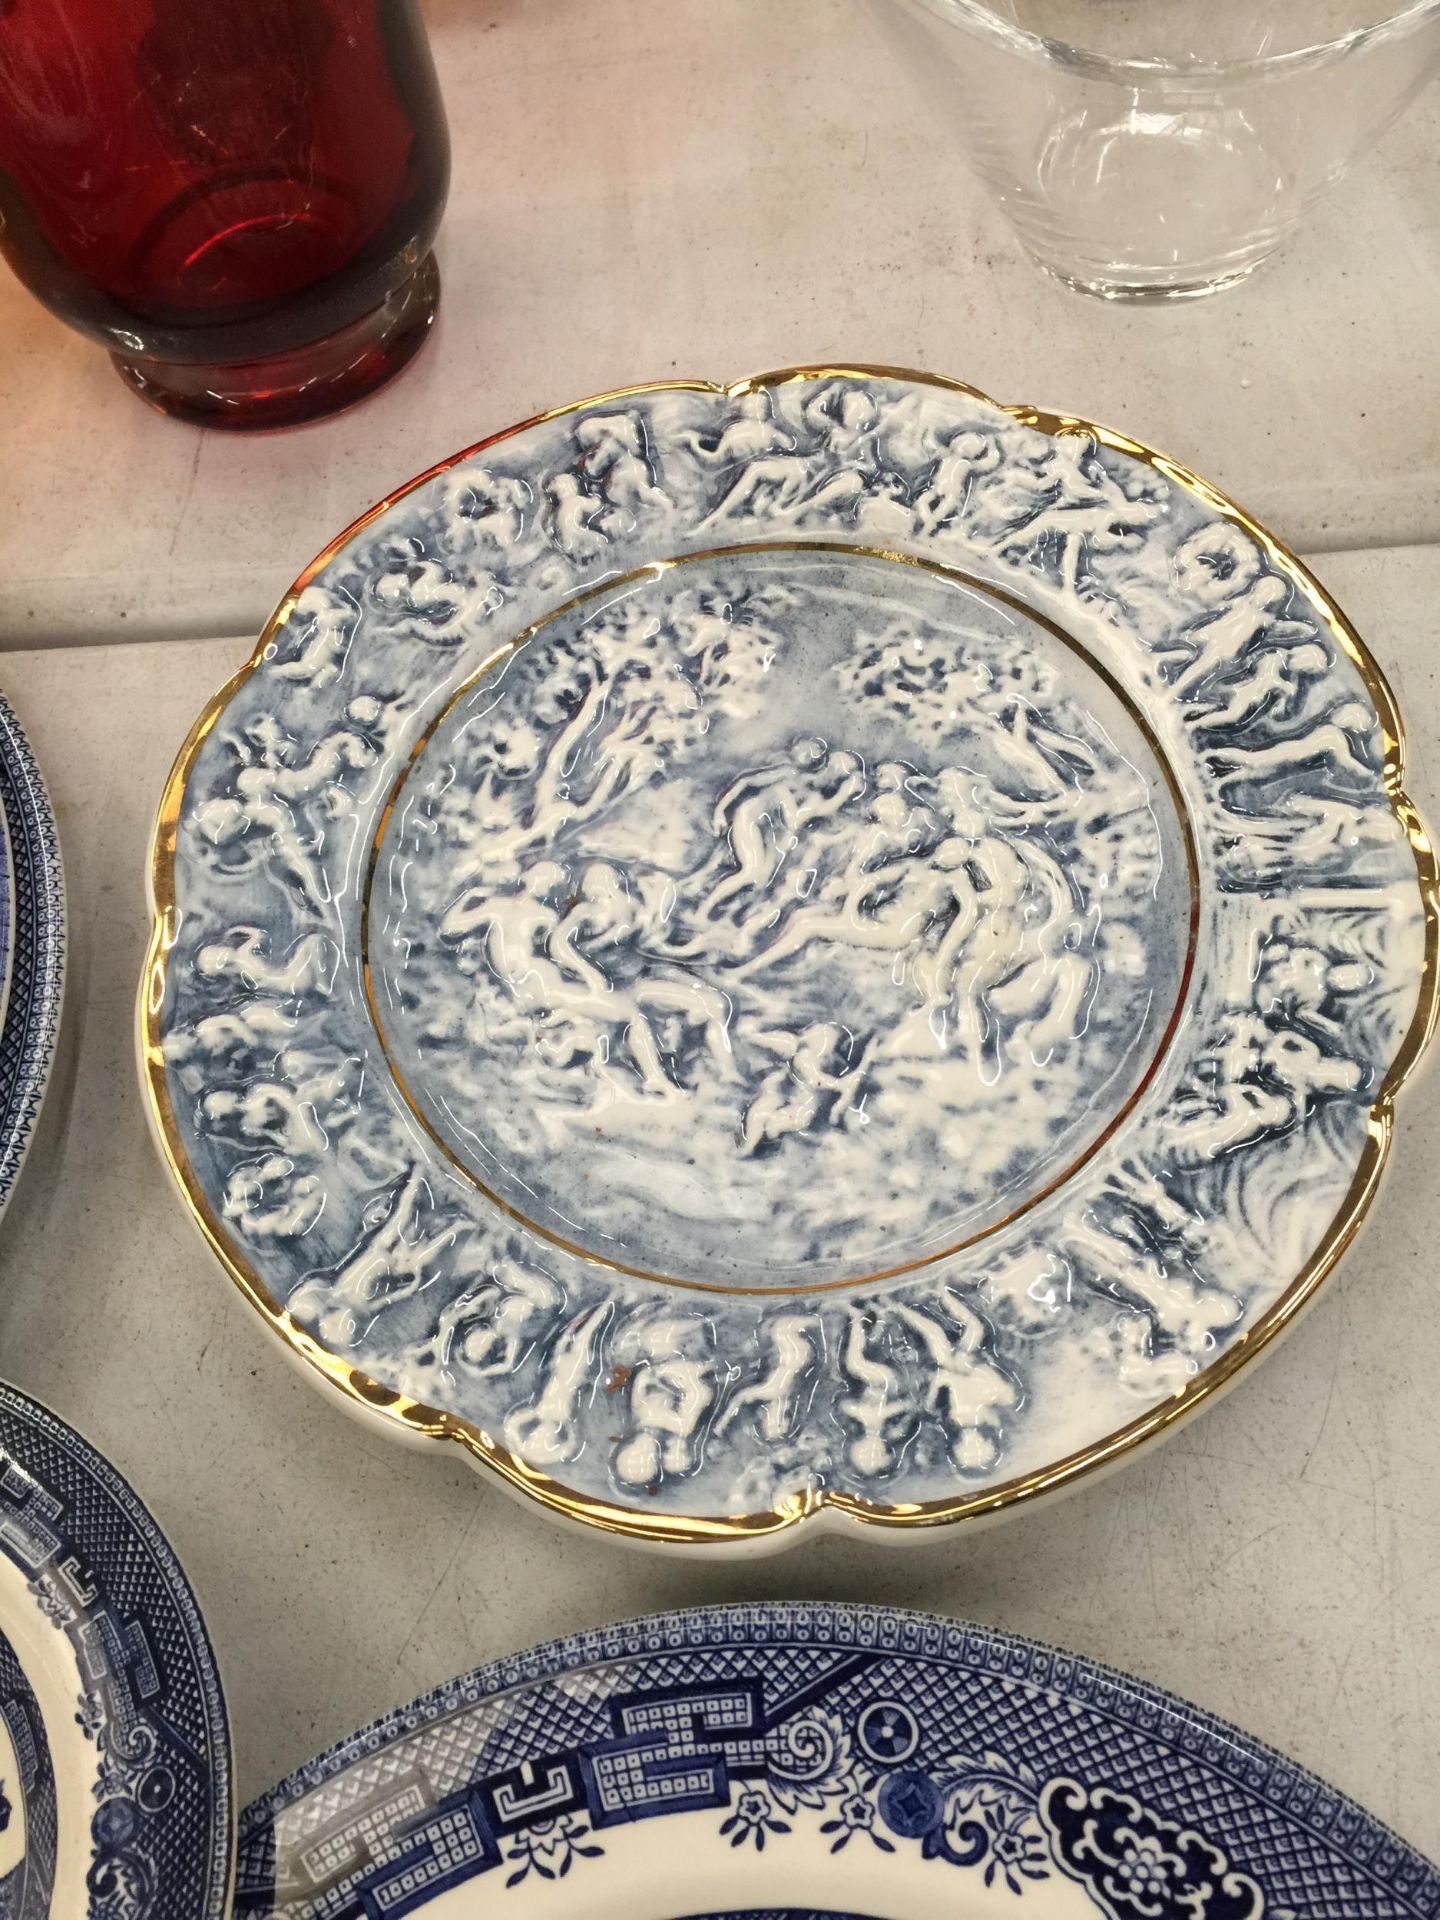 A QUANTITY OF BLUE AND WHITE 'WILLOW' PATTERN PLATES, CUPS AND SAUCERS PLUS A CAPODIMONTE MAJOLICA - Image 3 of 5